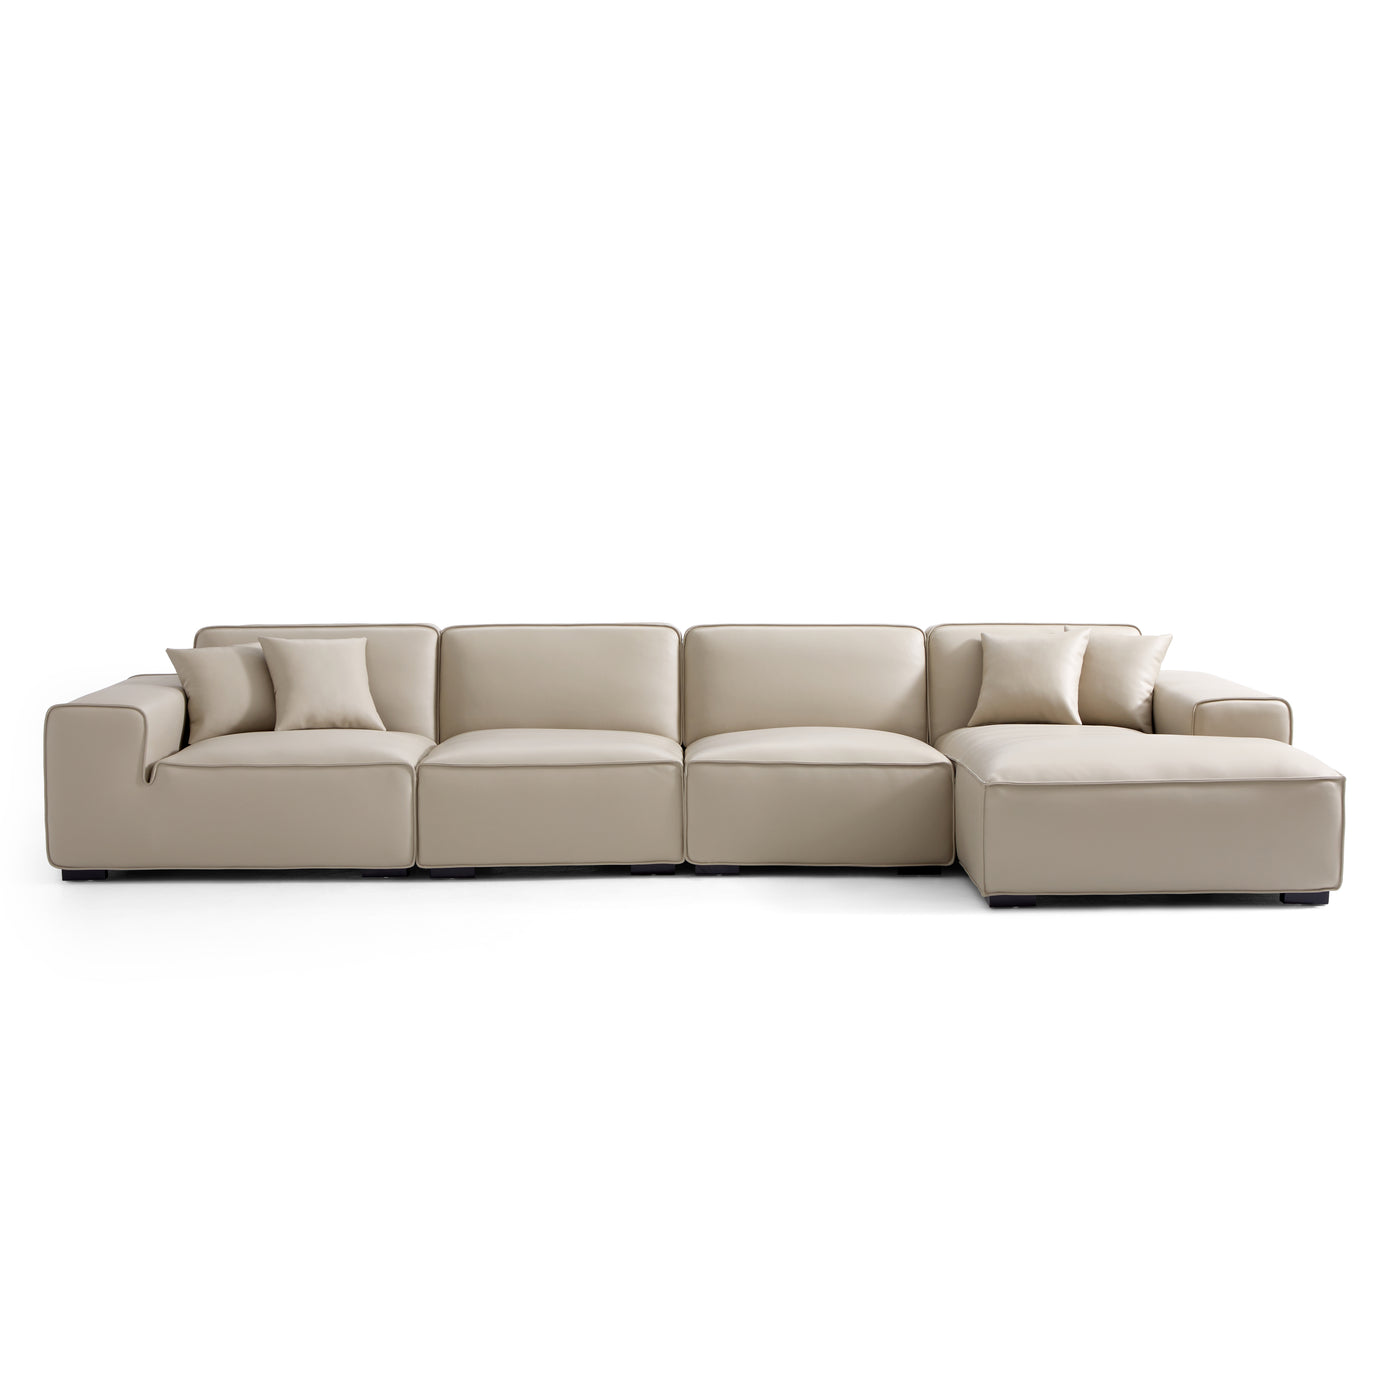 Domus Modular Black Leather Sectional Sofa-Beige-161.4"-Facing Right